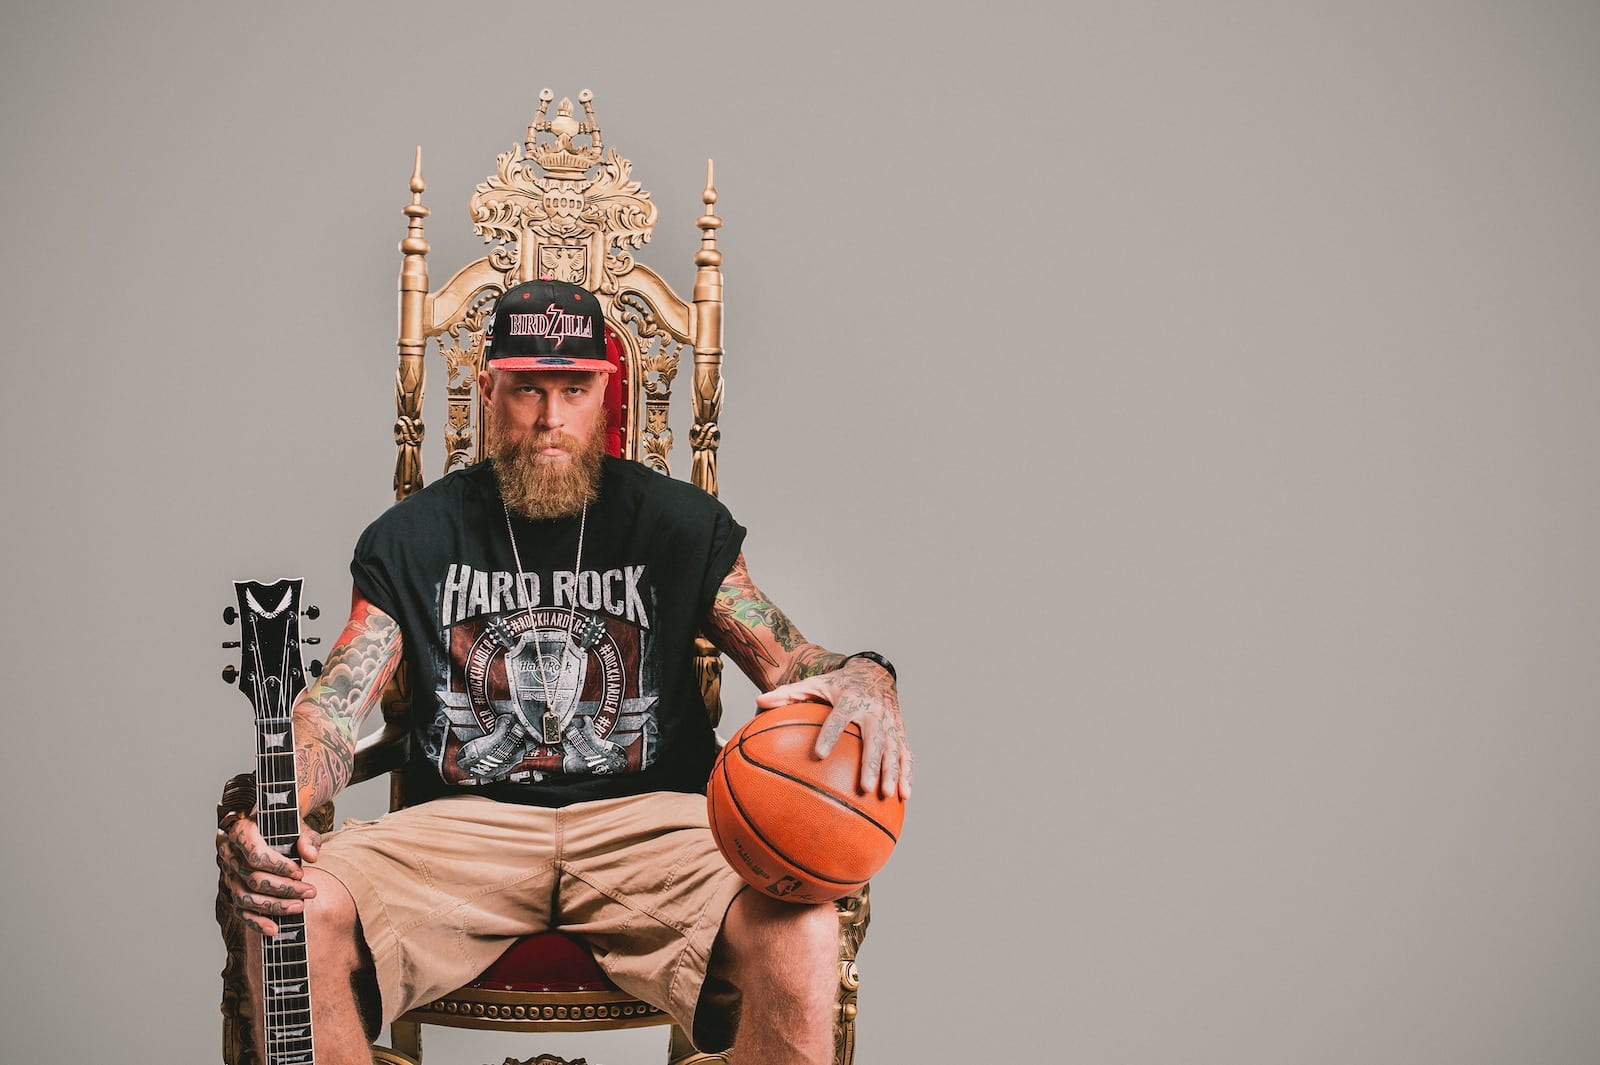 Hard Rock Energy Marketing by C&I Studios Bearded tattooed man holding guitar in one hand and a basketball in the other sitting on a throne posing for camera wearing a black Hard Rock tshirt